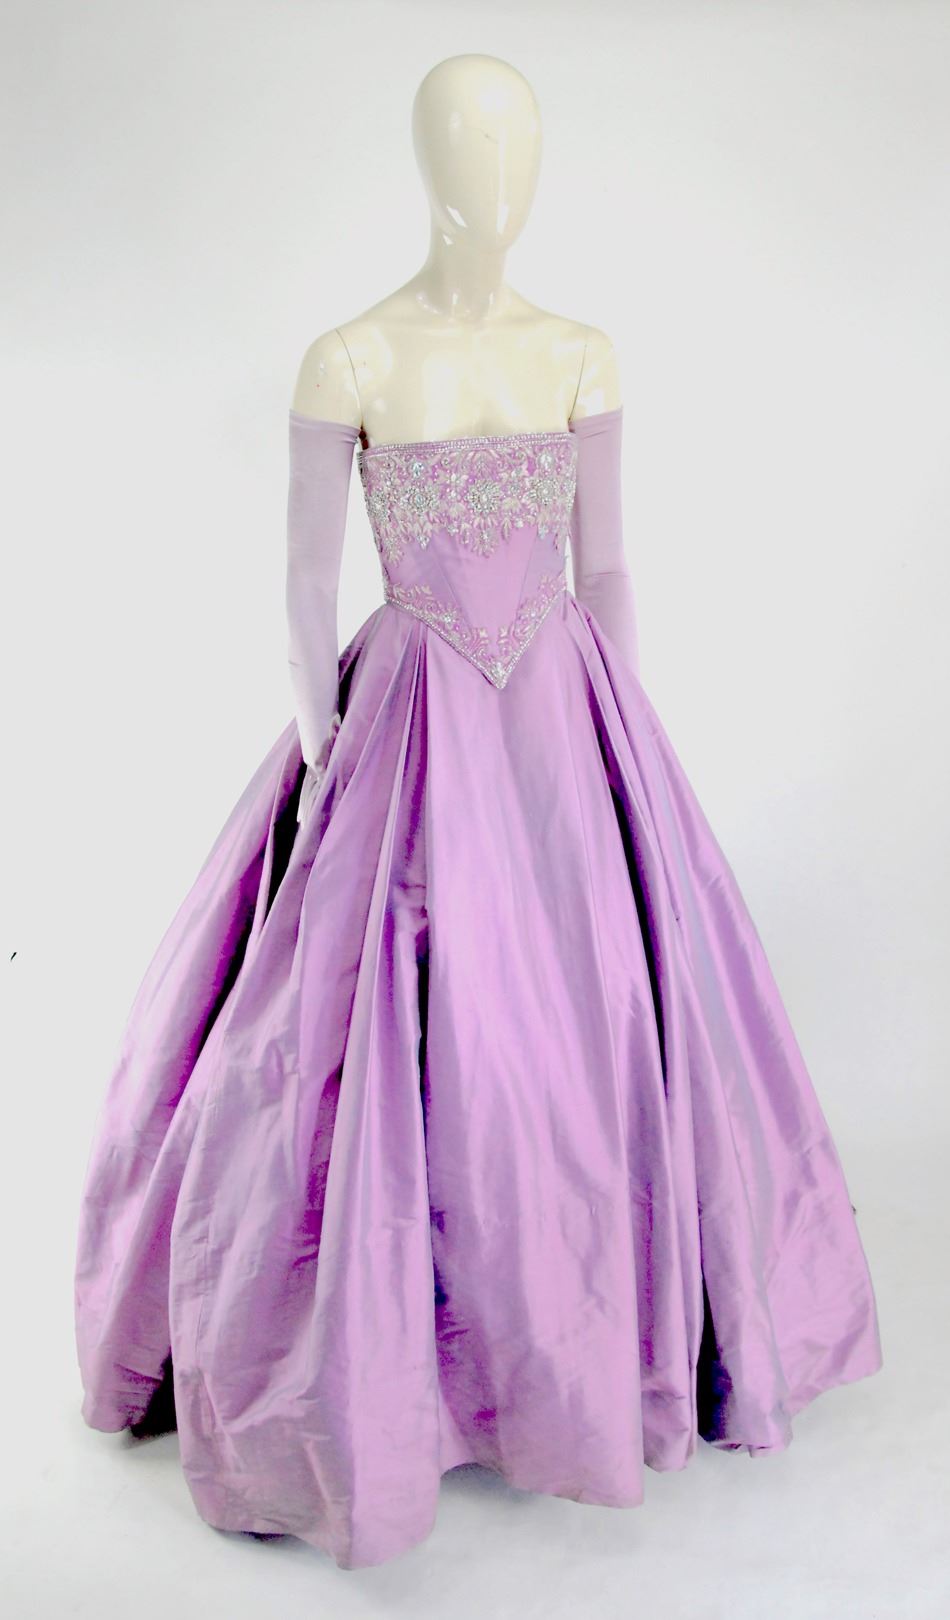 snow White and Emma Swan purple fairy tale gown from Once Upon a Time Season 1 4. 1